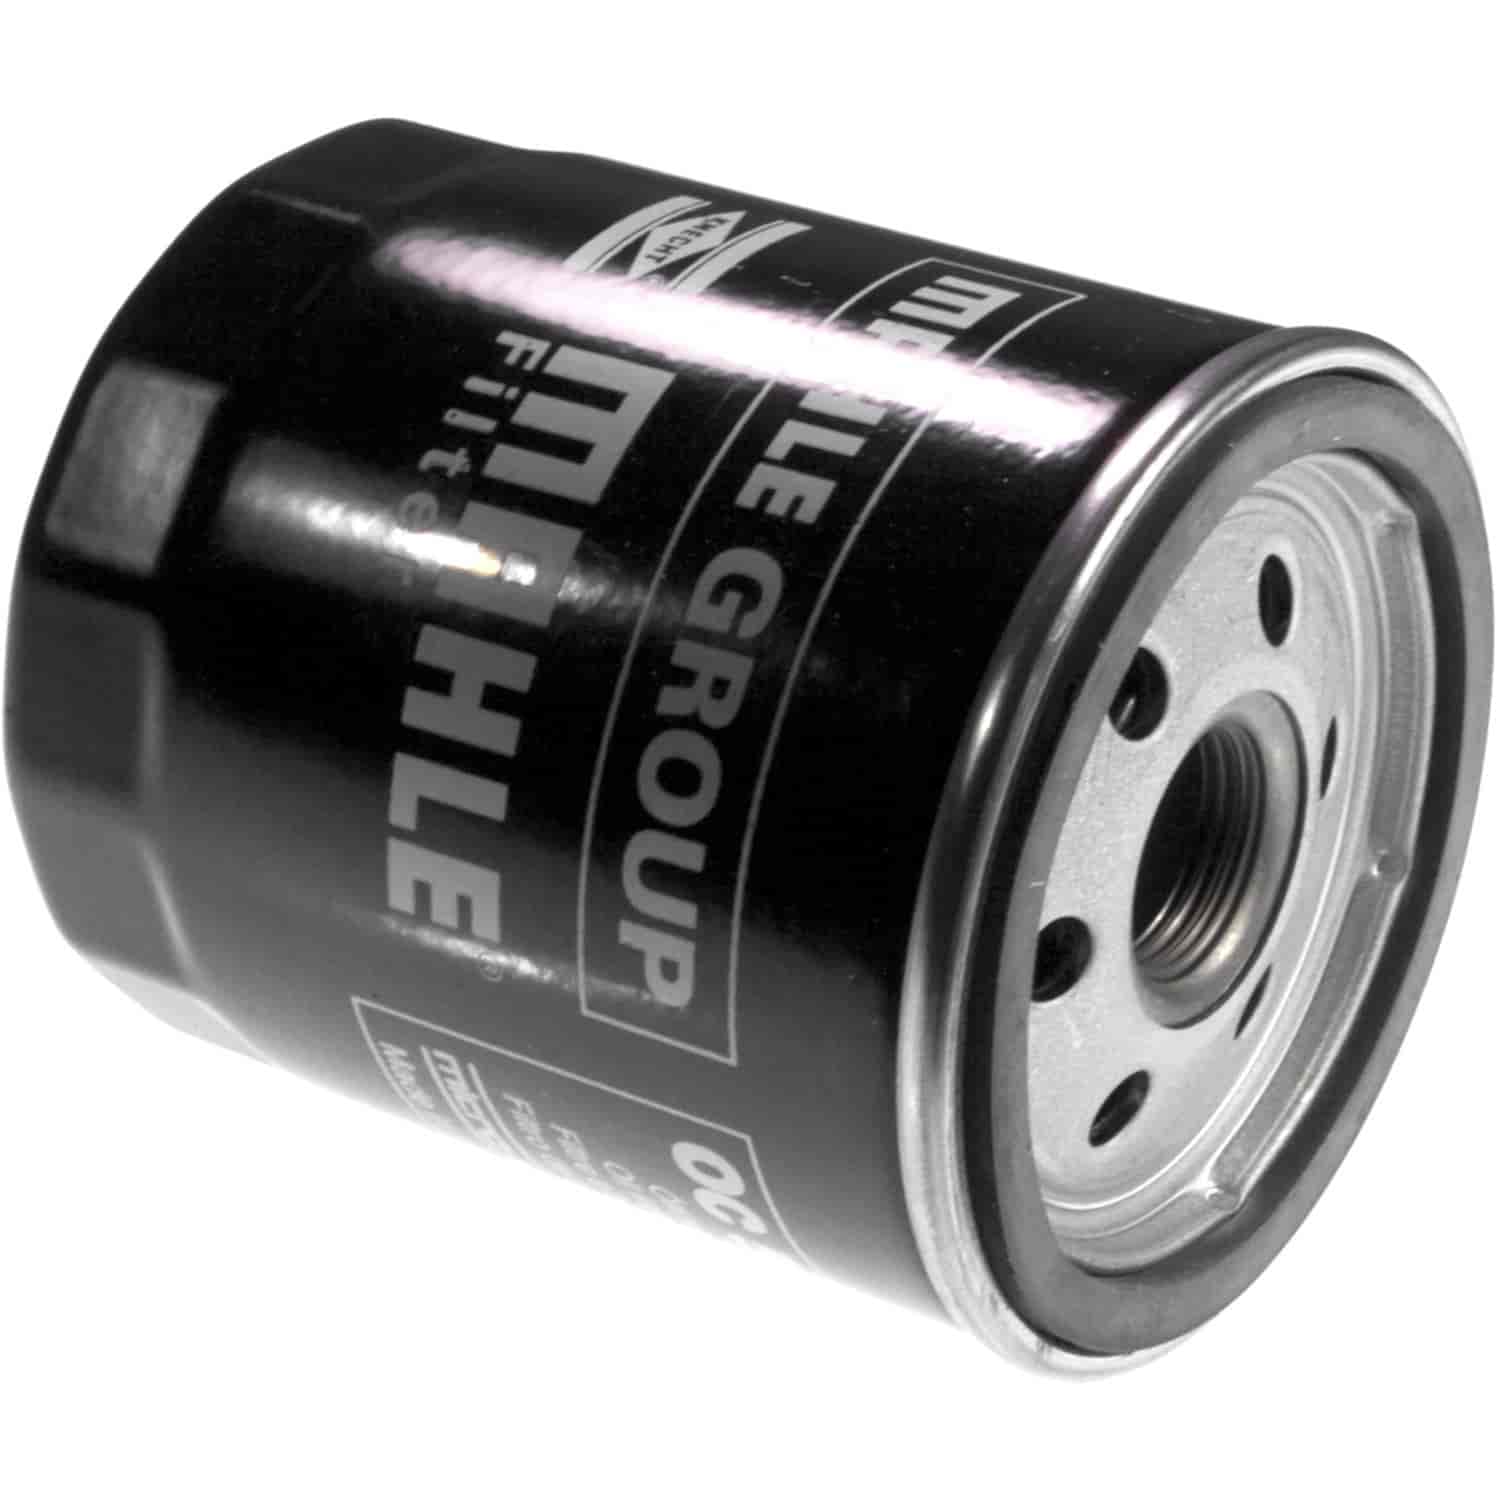 Mahle Oil Filter ALFA-ROMEO AND FIAT APPLICATIONS